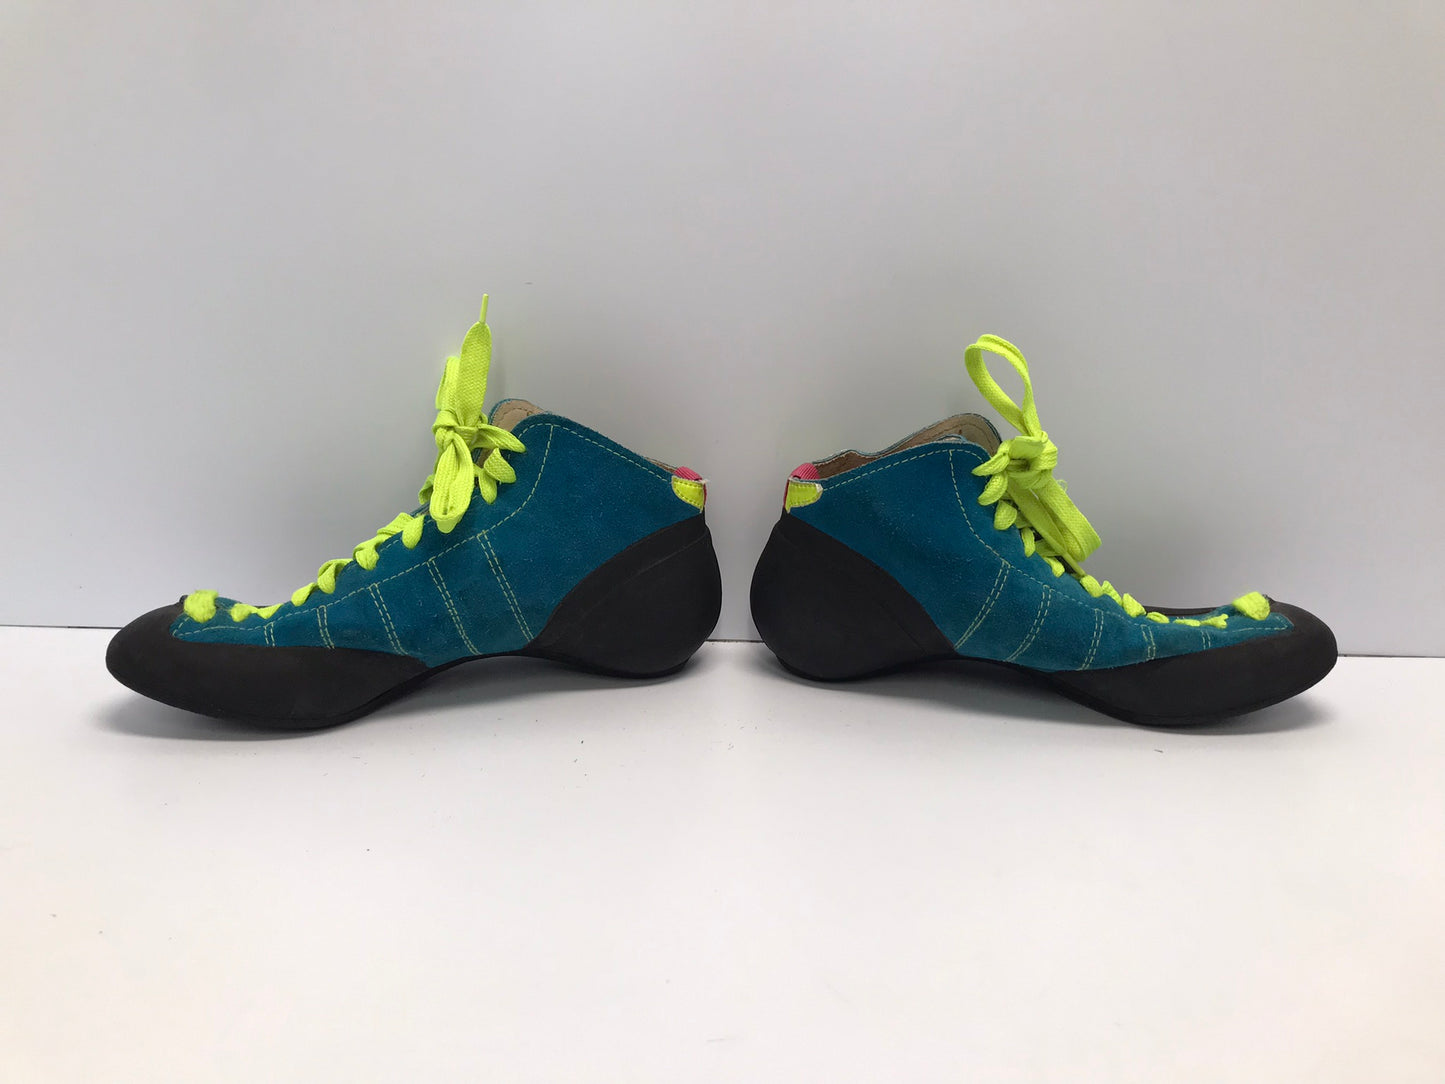 Rock Climbing Shoes Men's Size 9 Boreal Like New Teal Black